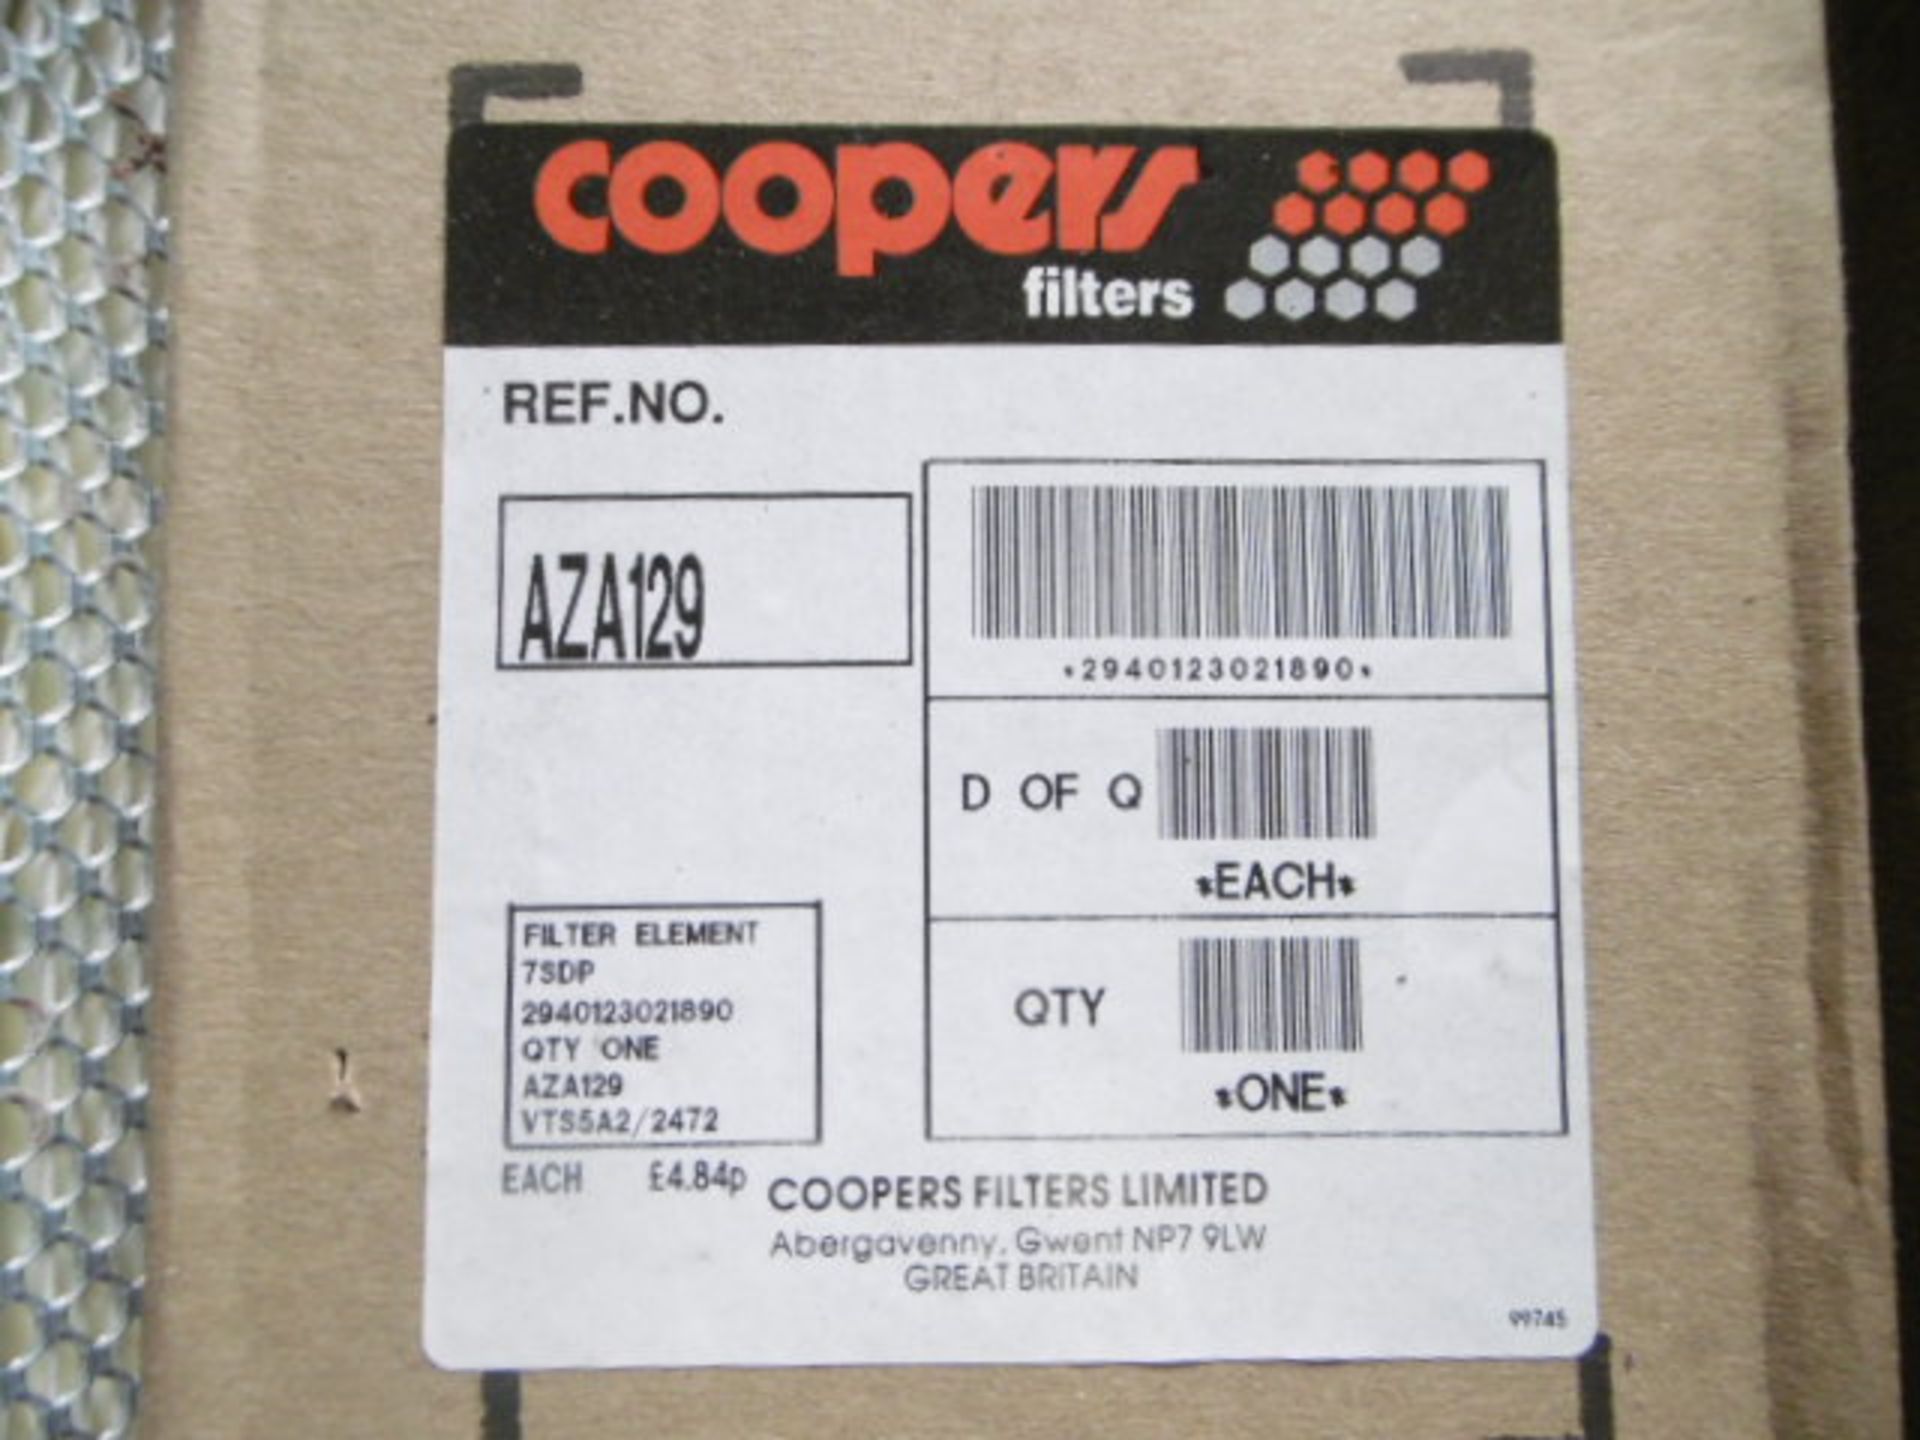 27 x Coopers AZA129 Air Filters - Image 4 of 4